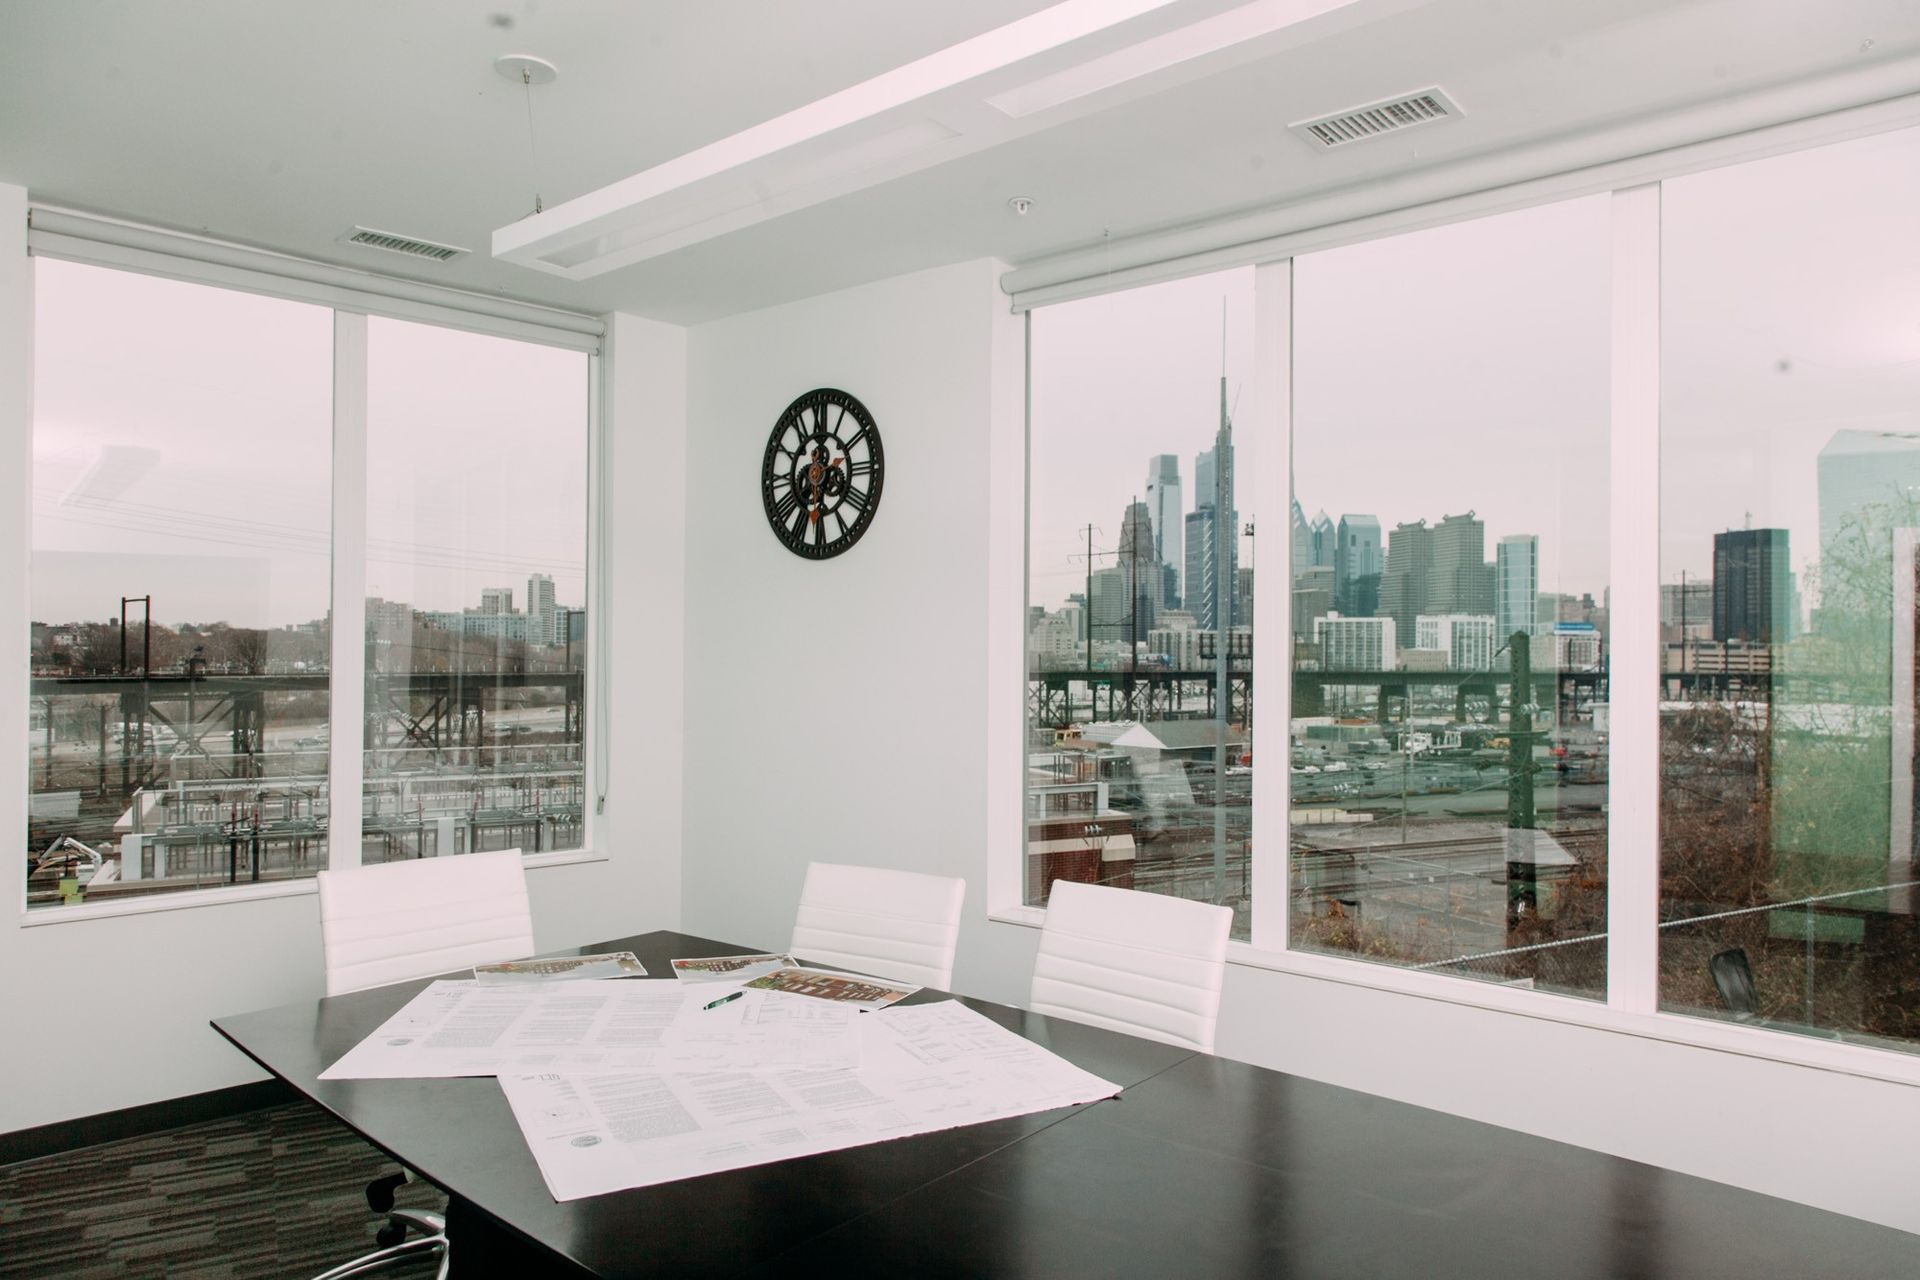 Conference room with Philadelphia background